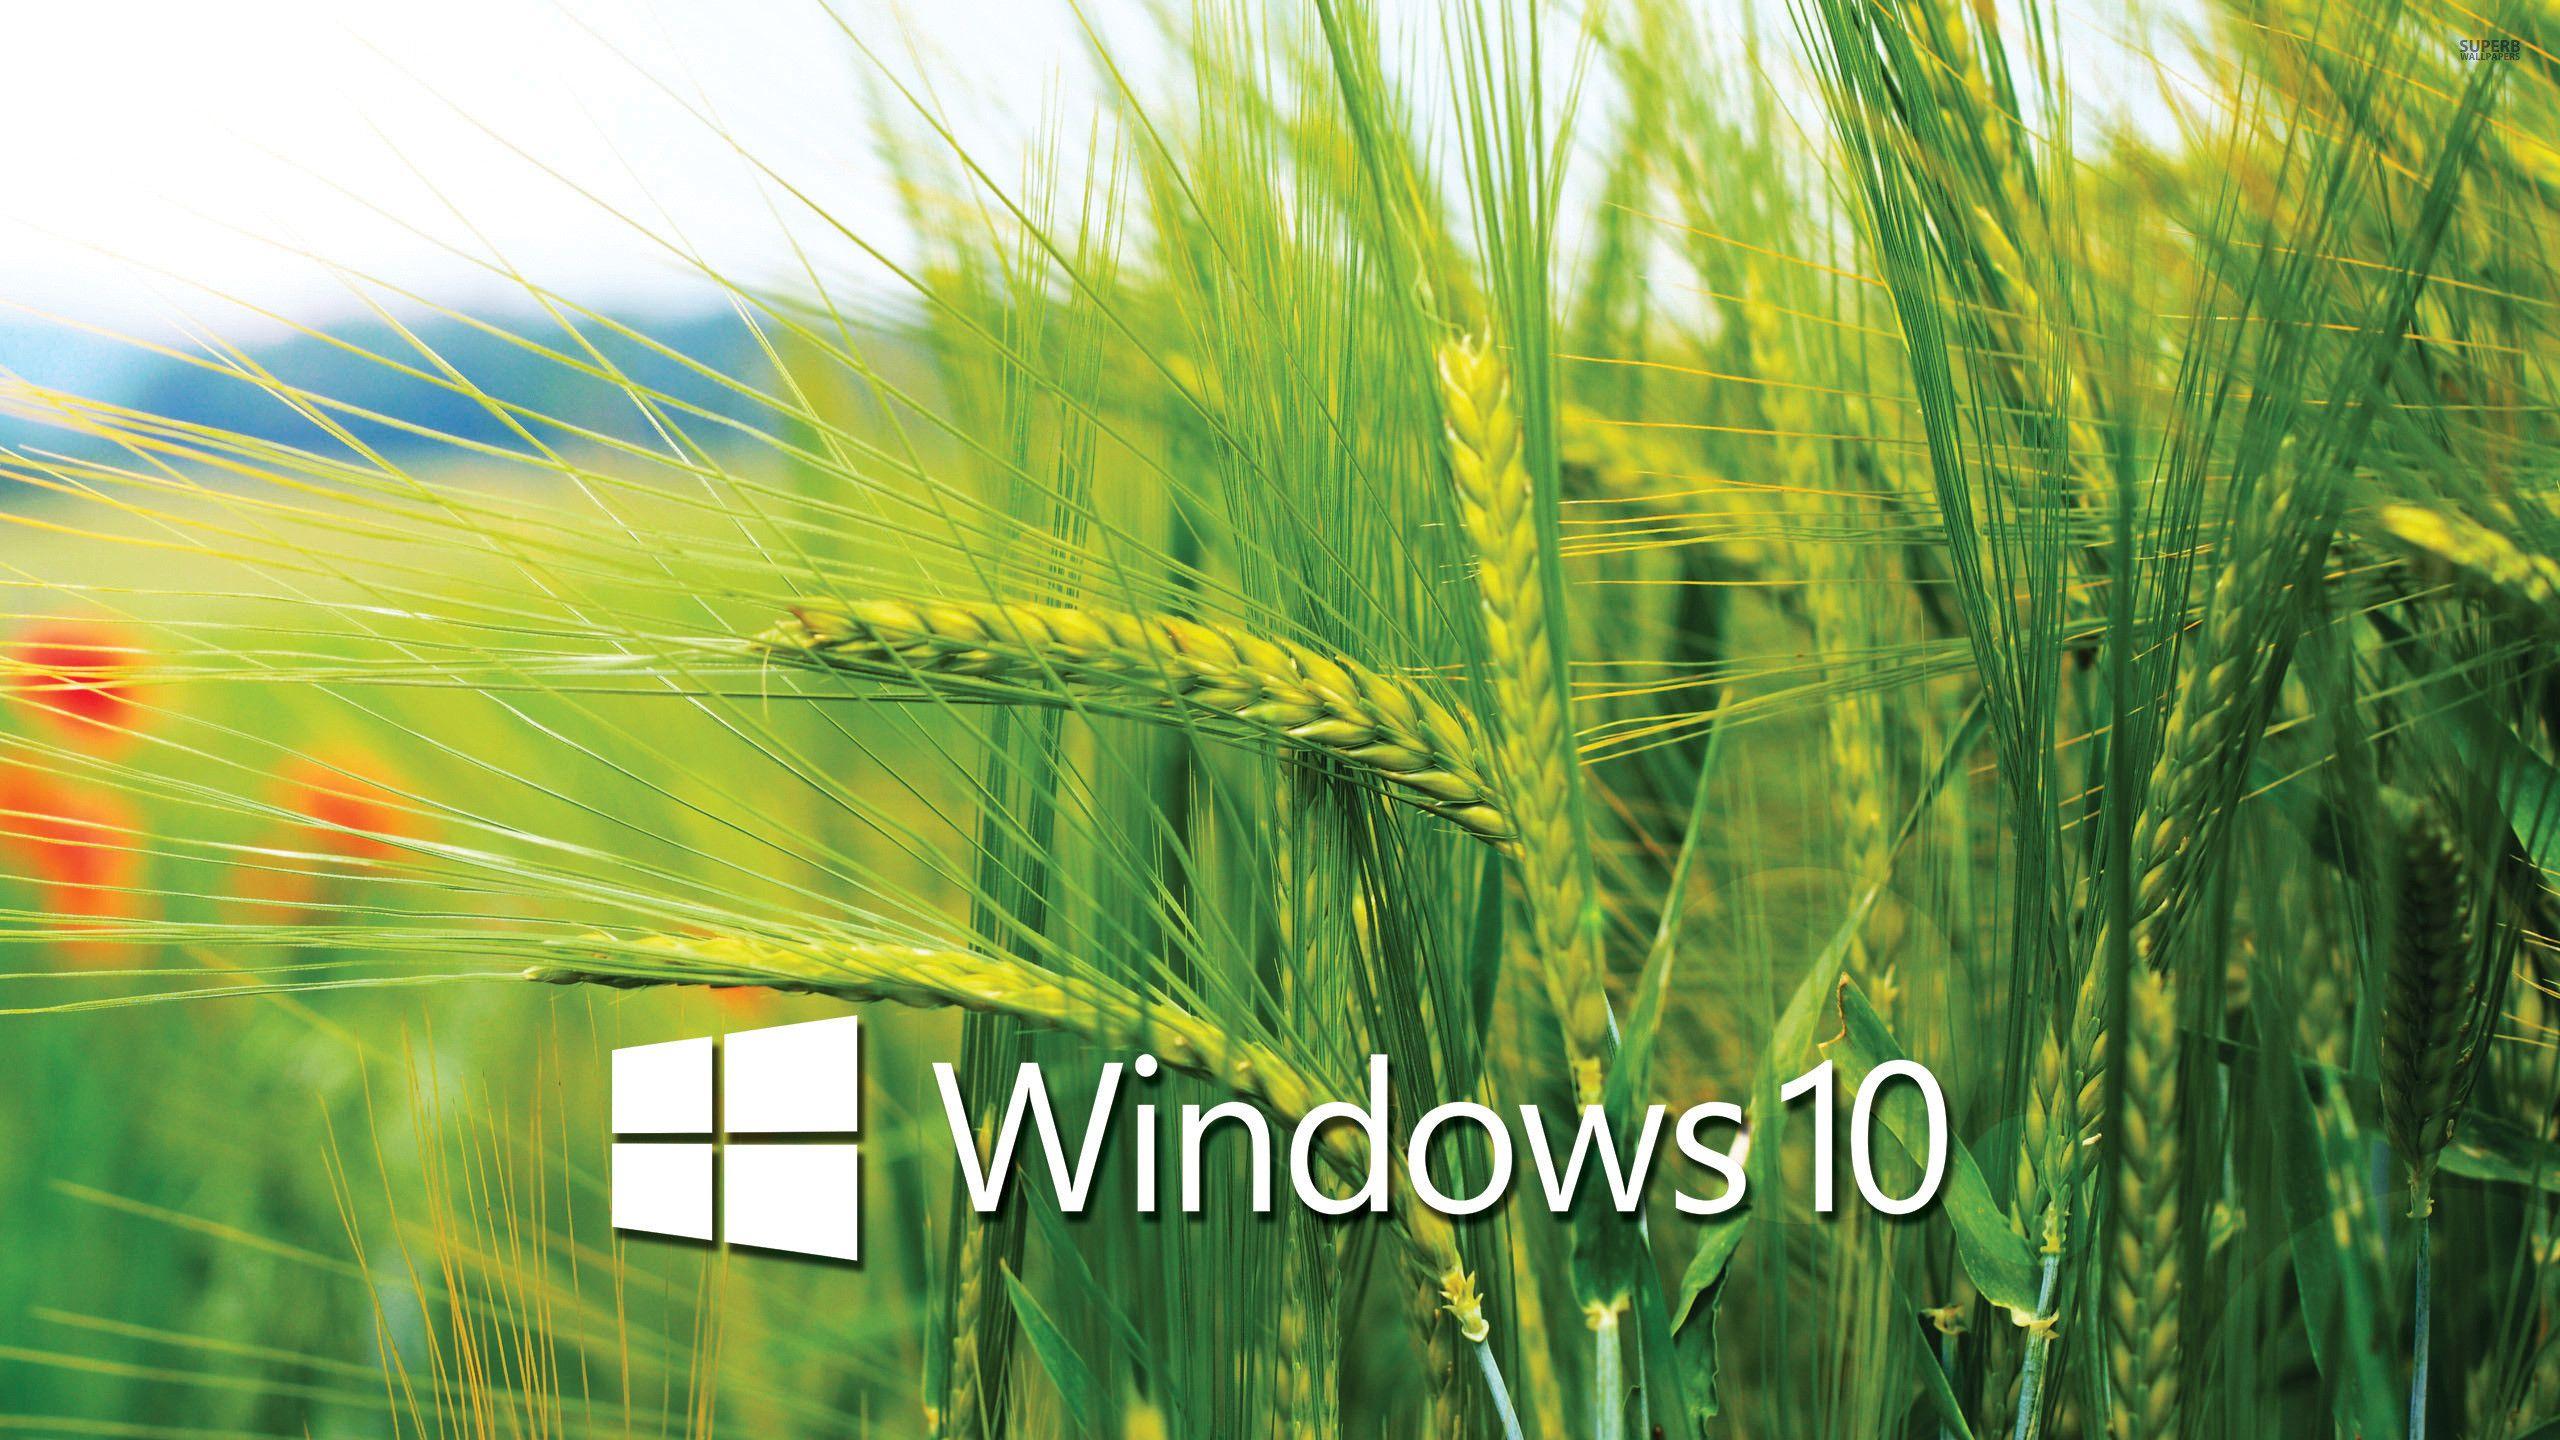 Wheat Crops Windows 10 Wallpapers, Windows 10 Wallpapers